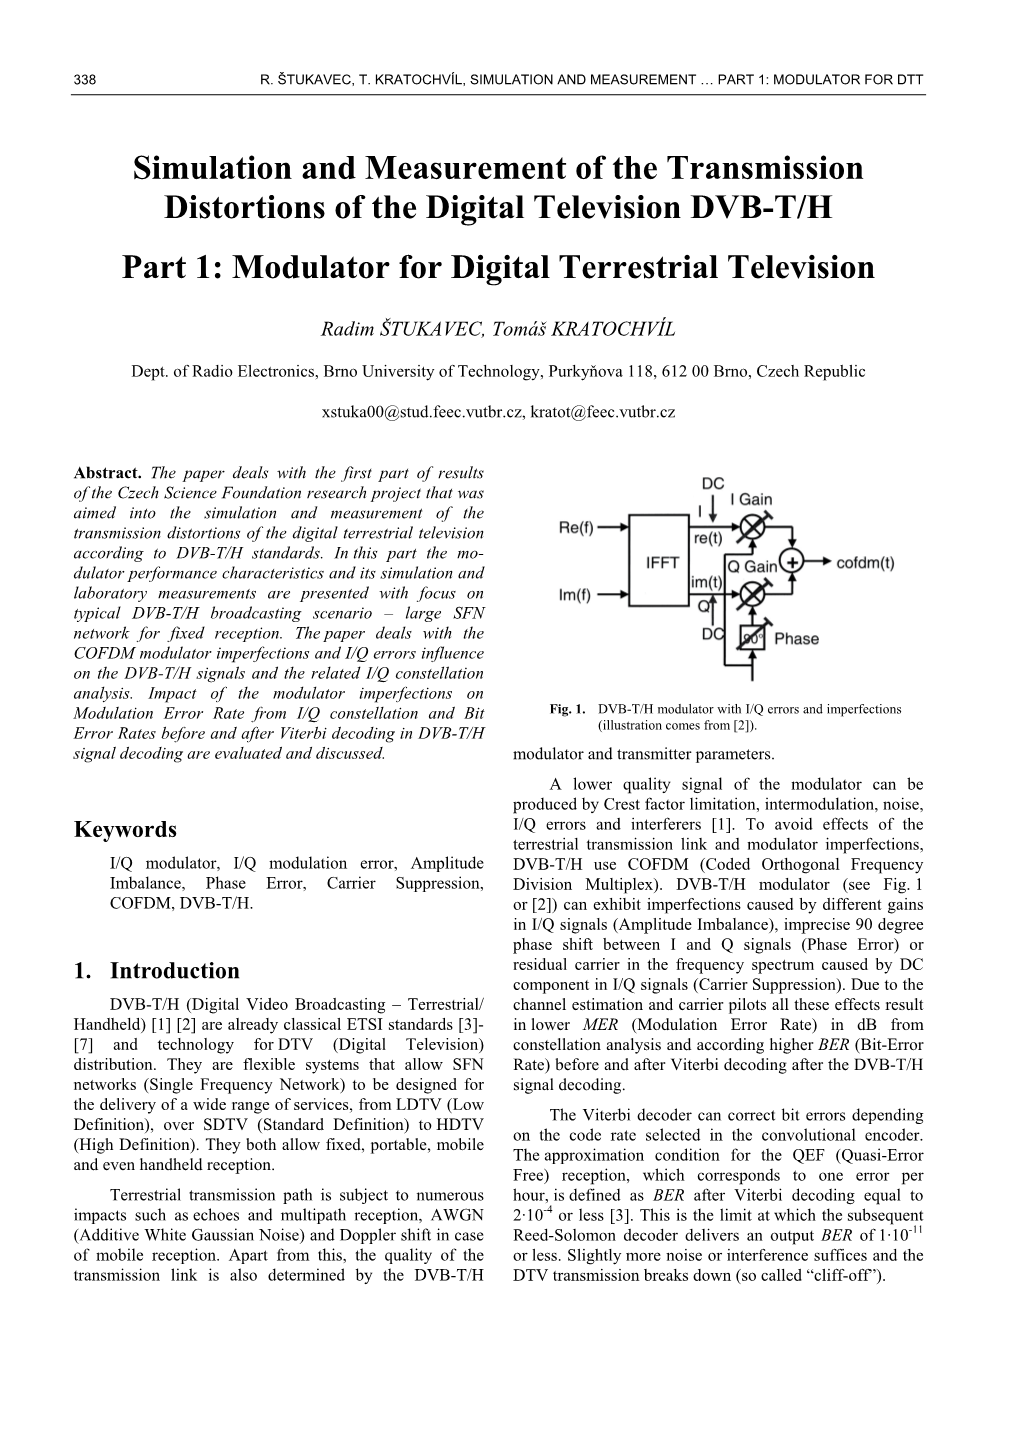 Simulation and Measurement of the Transmission Distortions of the Digital Television DVB-T/H Part 1: Modulator for Digital Terrestrial Television